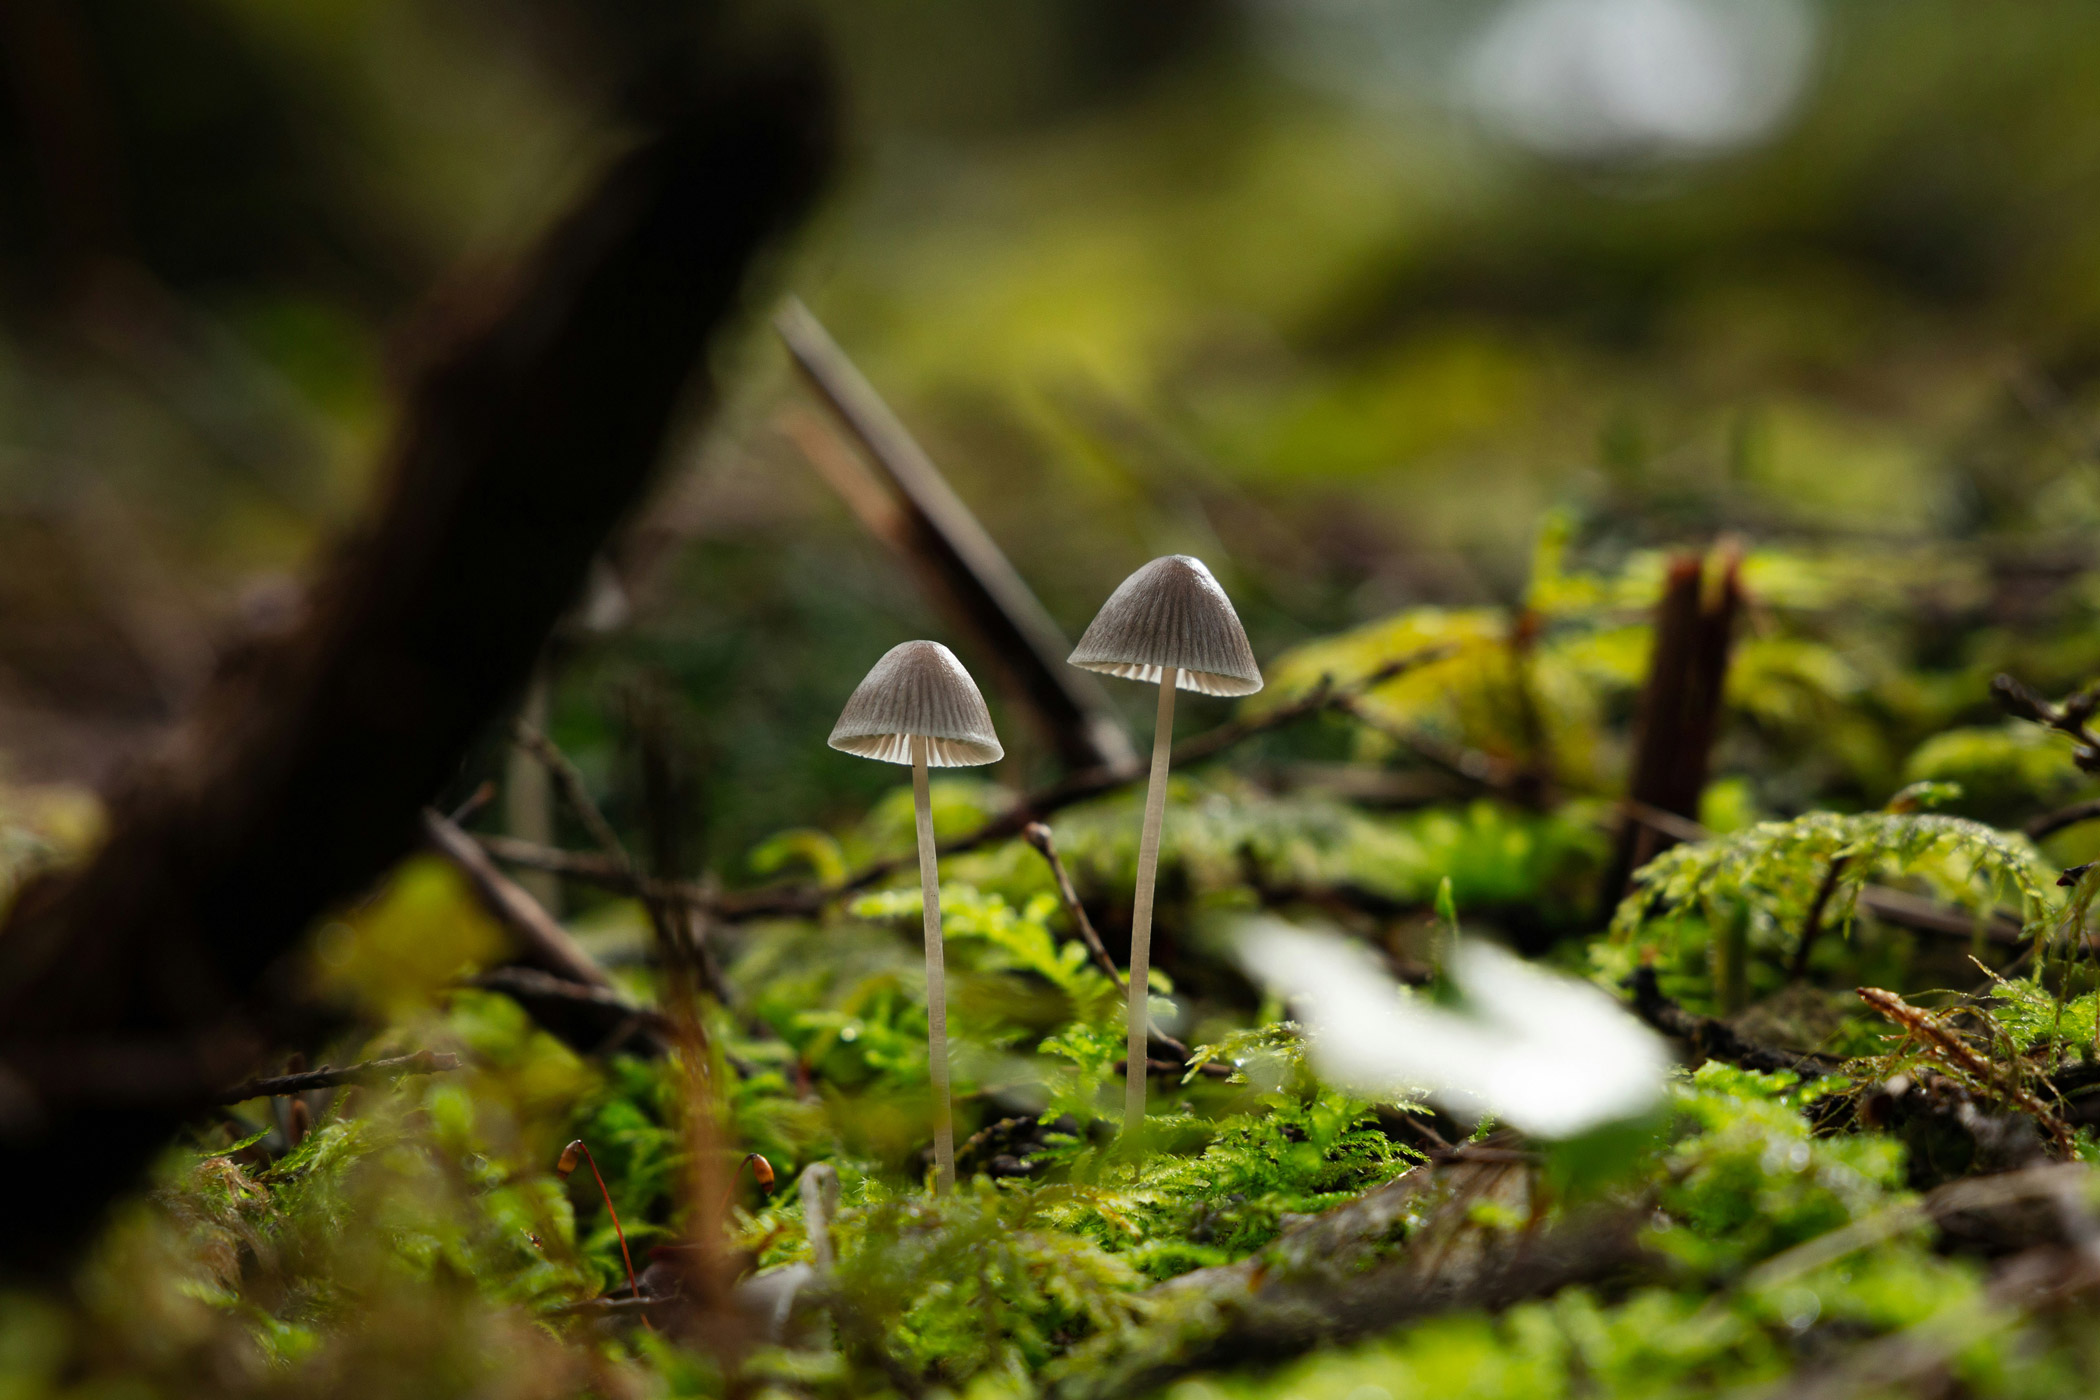 A photograph of mushrooms growing in the grass